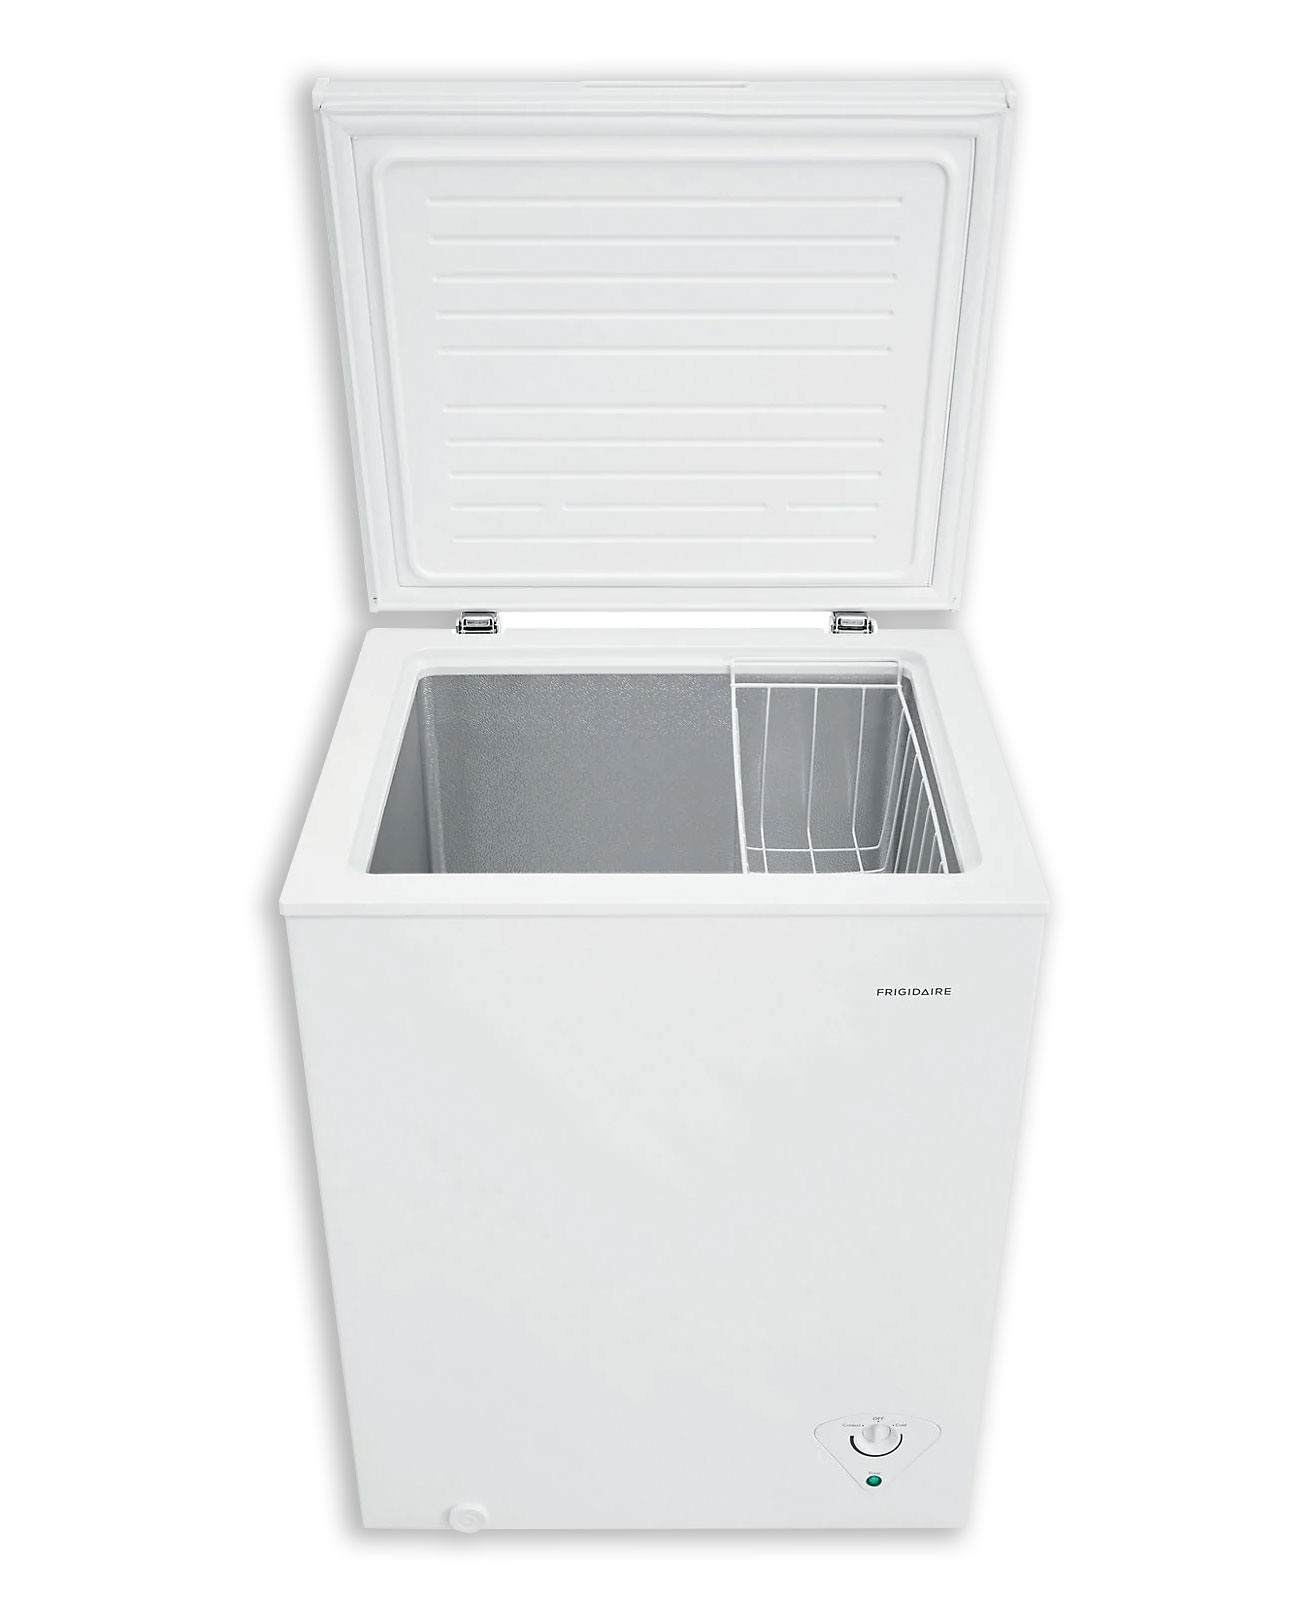 5.0 Cubic Feet Chest Freezer with Removable Basket, from 6.8 to -4 Free  Standing Compact Fridge Freezer for Home/Kitchen/Office/Bar (WHITE)… :  Appliances 